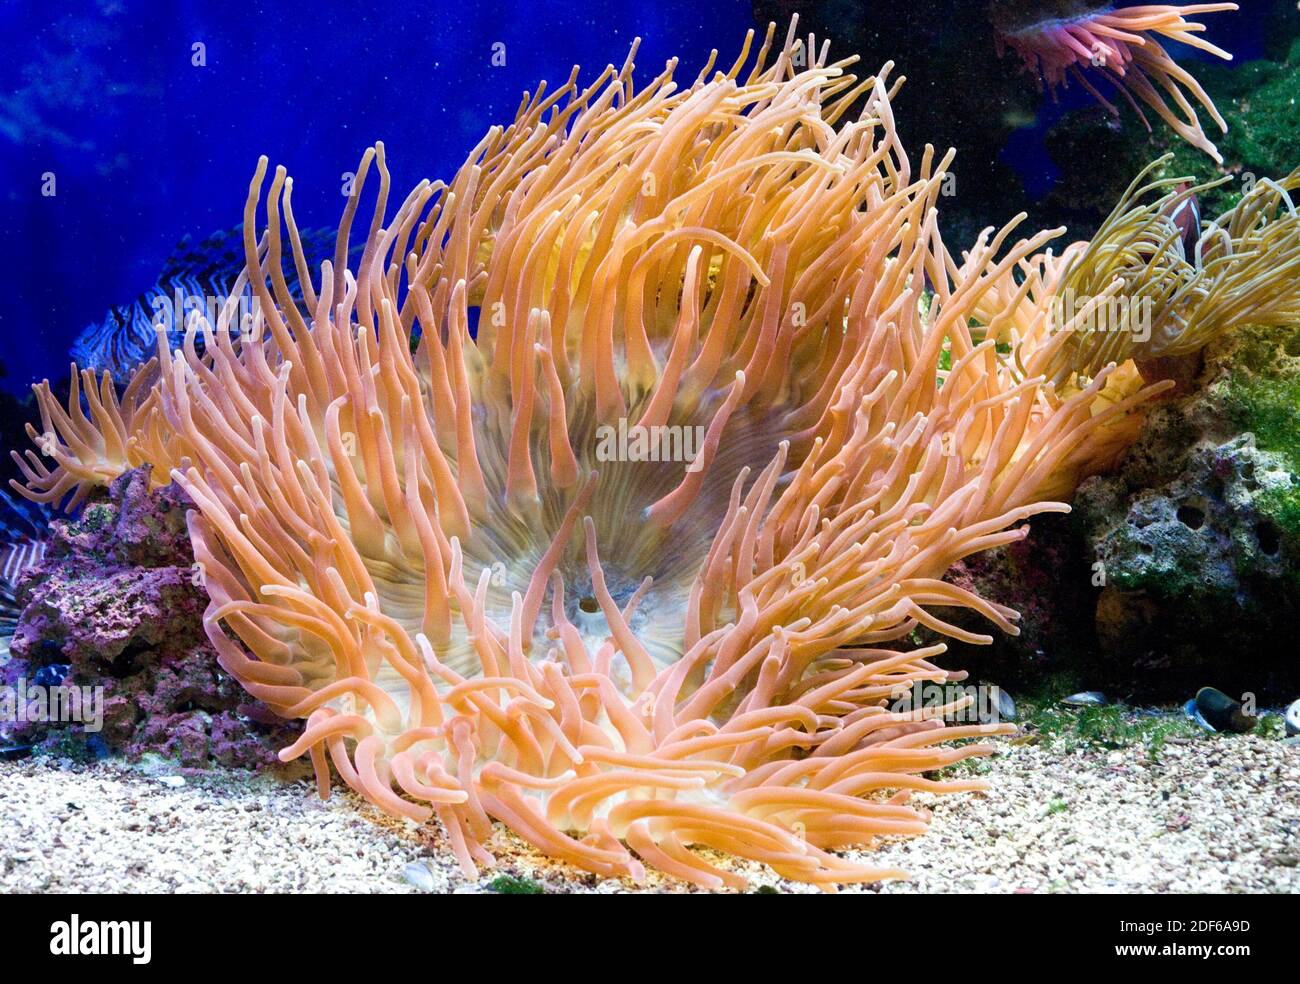 Magnificent sea anemone (Heteractis magnifica) lives in de tropical waters of the Indo-Pacific ocean. Photo taken in captivity. Stock Photo